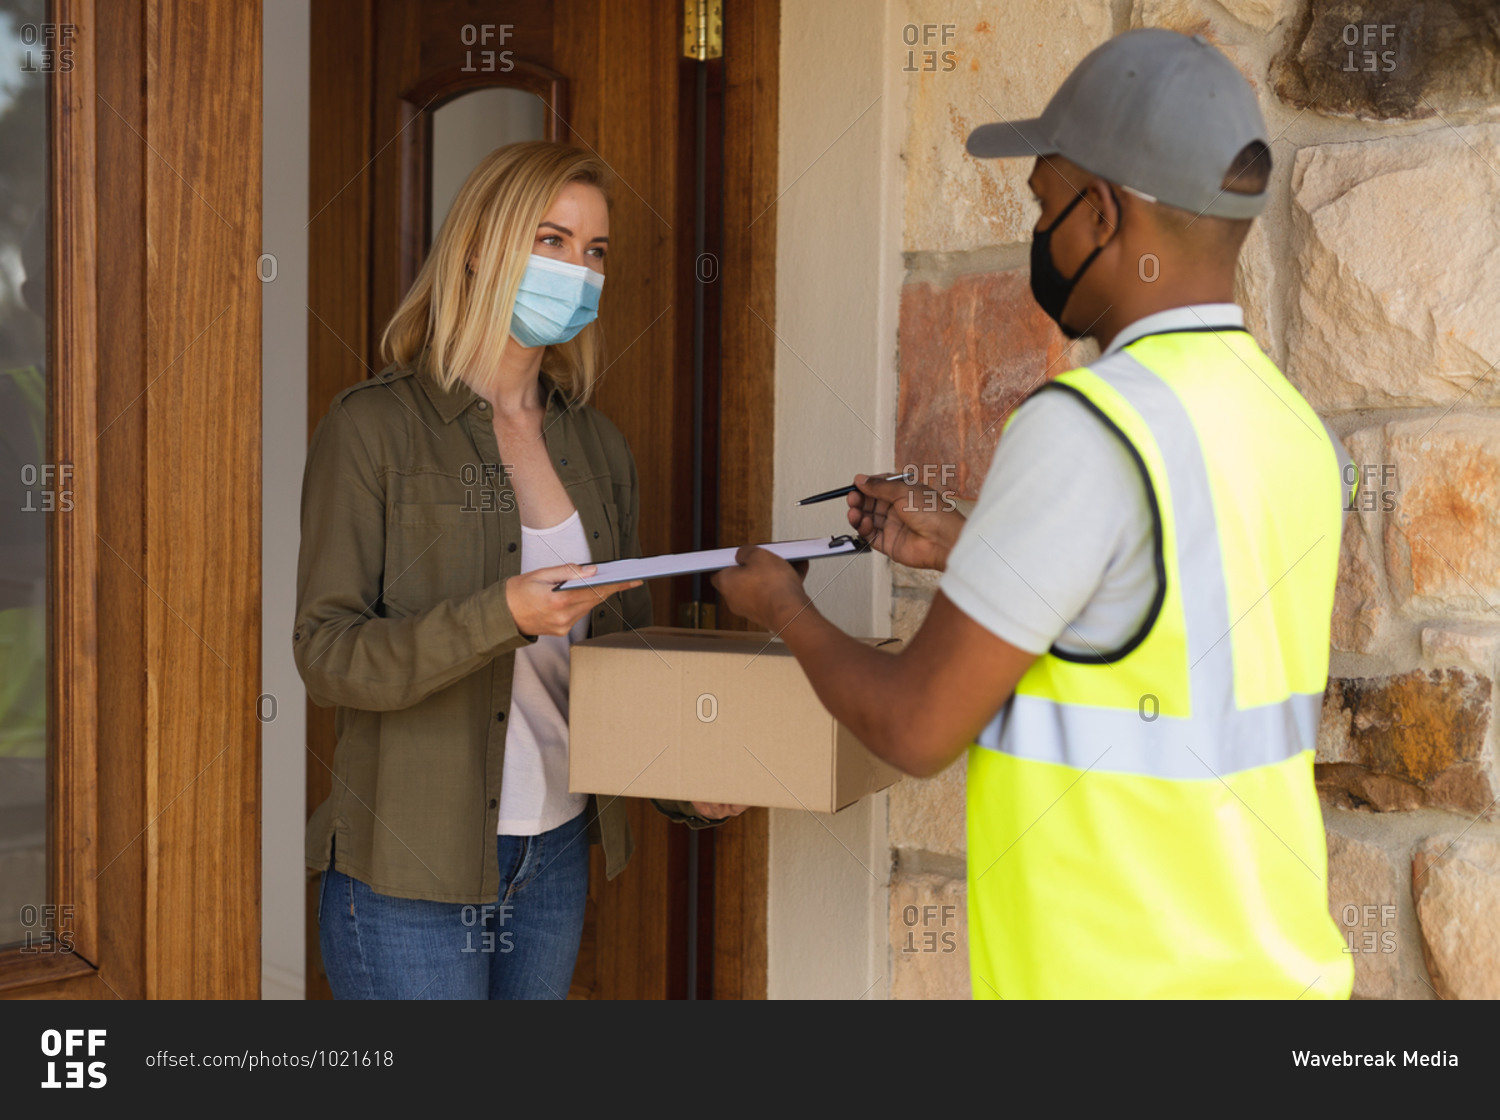 Caucasian woman spending time at home, wearing face mask, receiving a package from delivery man. Social distancing during Covid 19 Coronavirus quarantine lockdown.